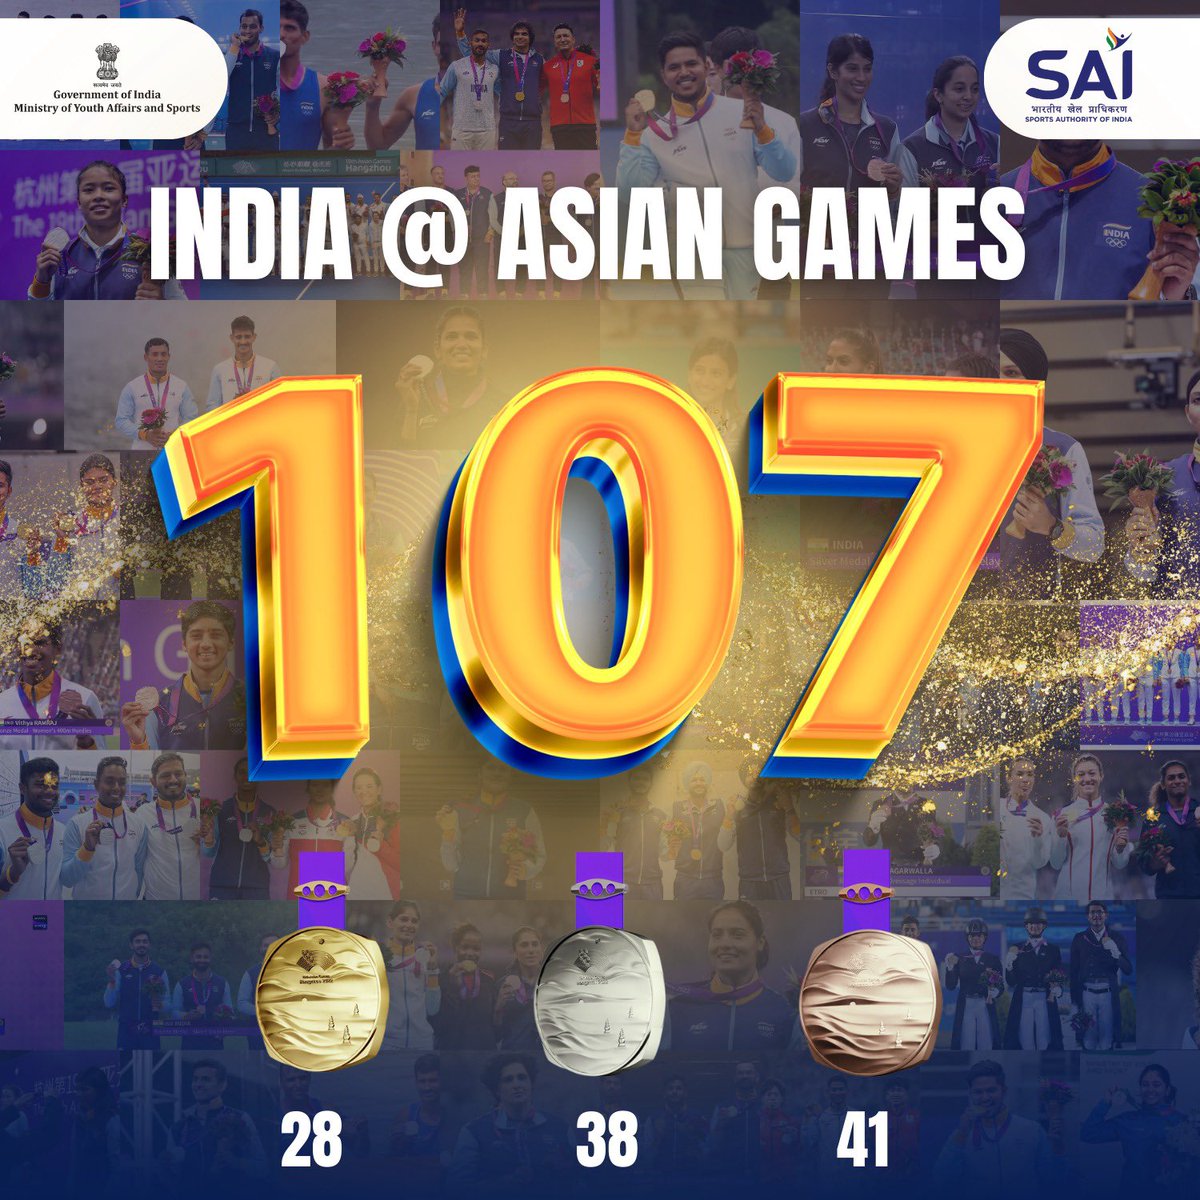 Historic moment for India at the Asian Games! 🥇🥈🥉 Our athletes' outstanding performance with a record-breaking 107 medals is a source of immense joy and pride. Their relentless spirit and dedication inspire us all. 🇮🇳🏆